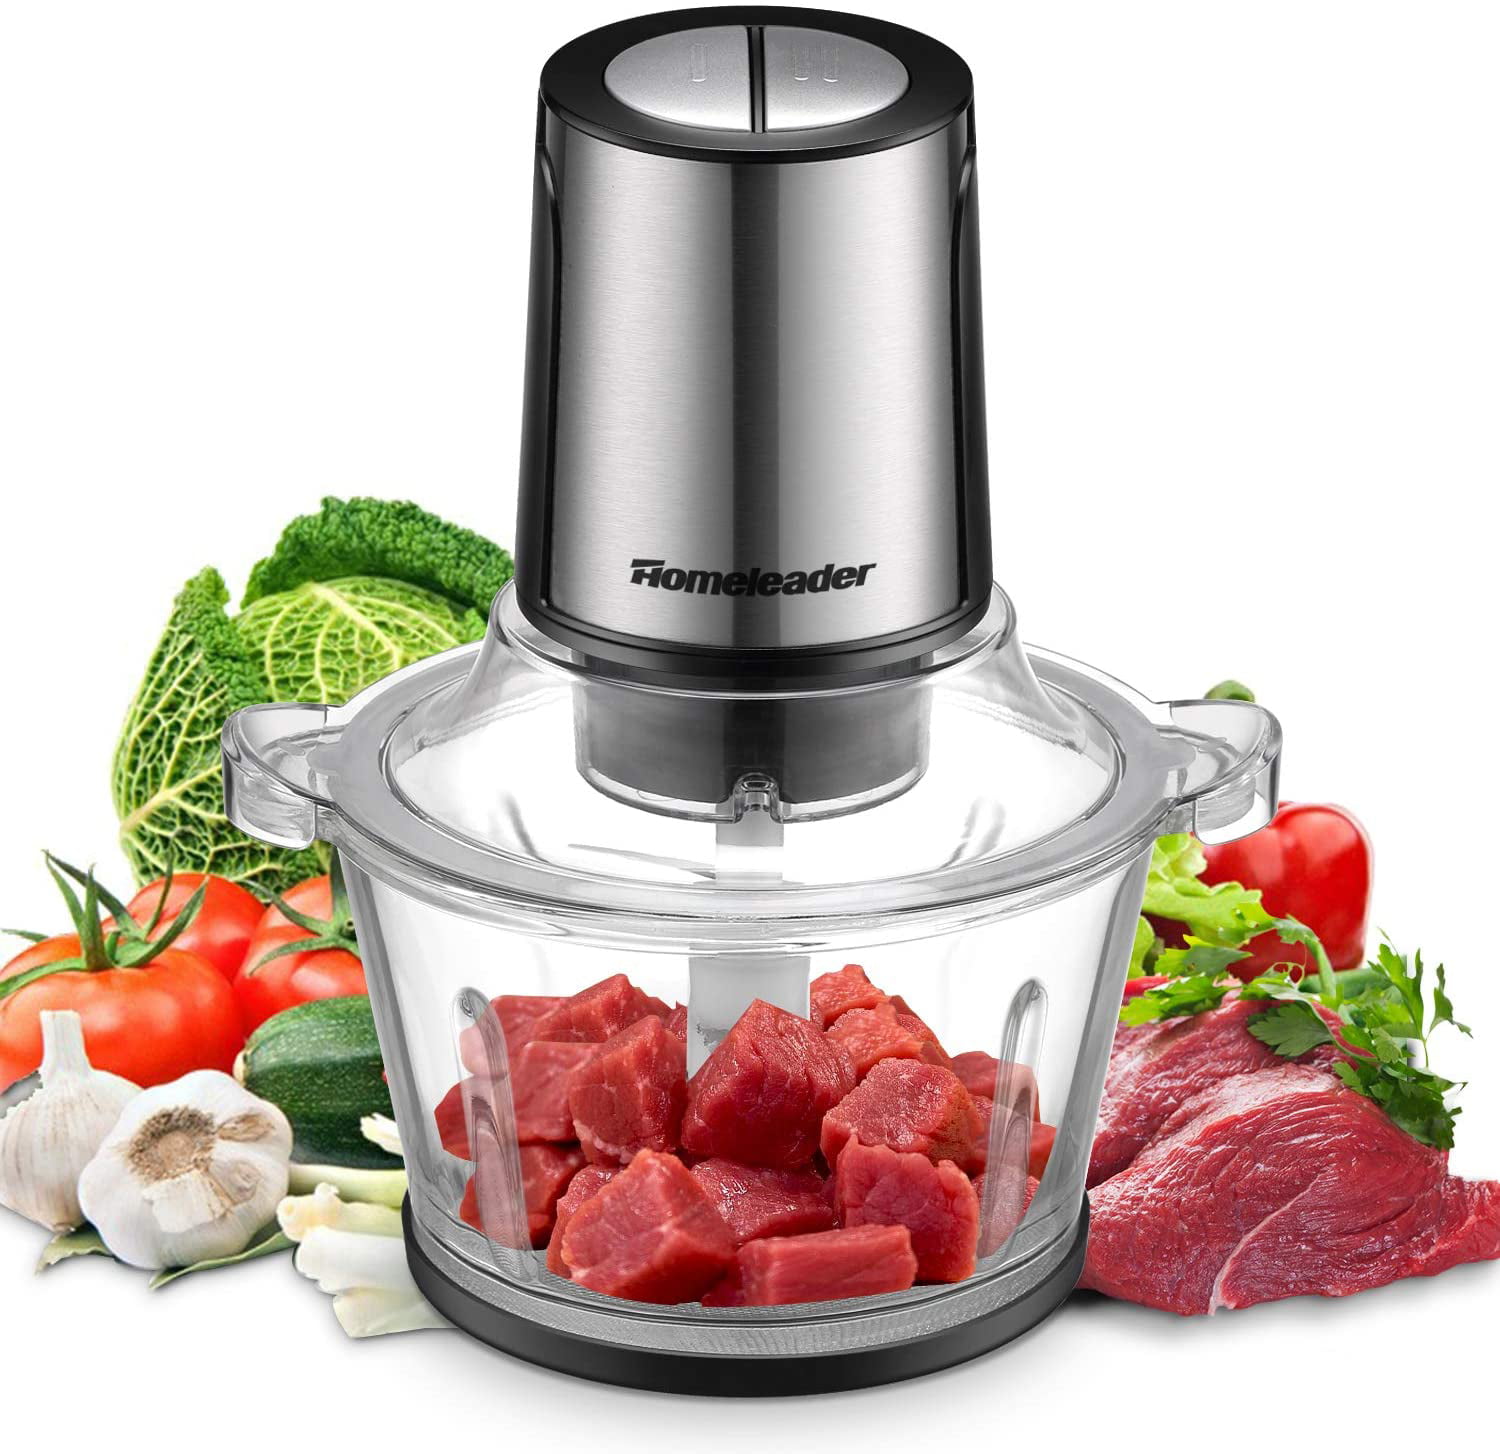 Homeleader Electric Food Chopper - Blender and Food Processor Combo, 3 in 1 Food Grinder Electric for Meat, Vegetables, Fruits, Coffee, 8 Cup Glass